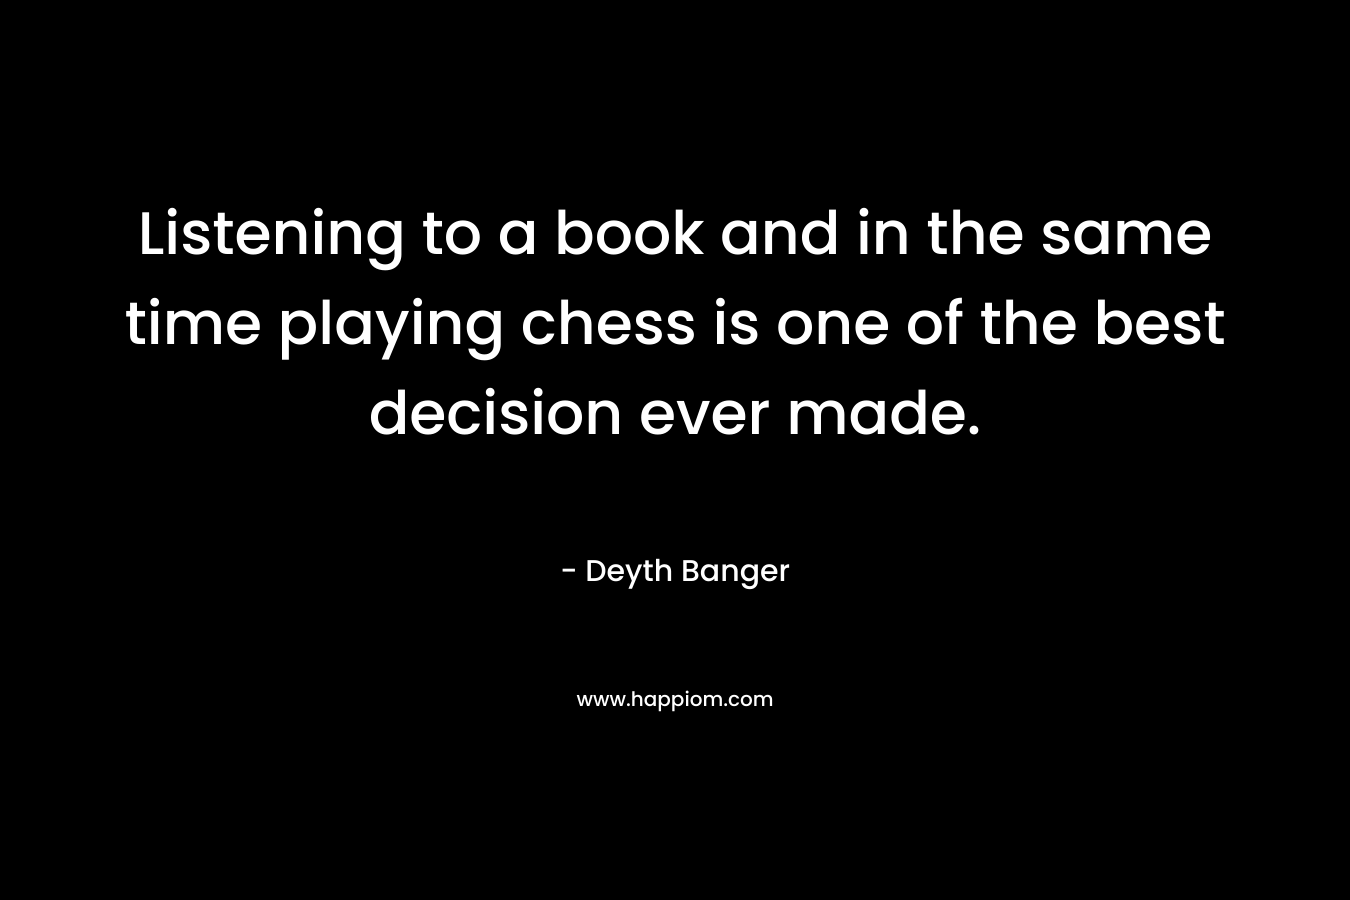 Listening to a book and in the same time playing chess is one of the best decision ever made.